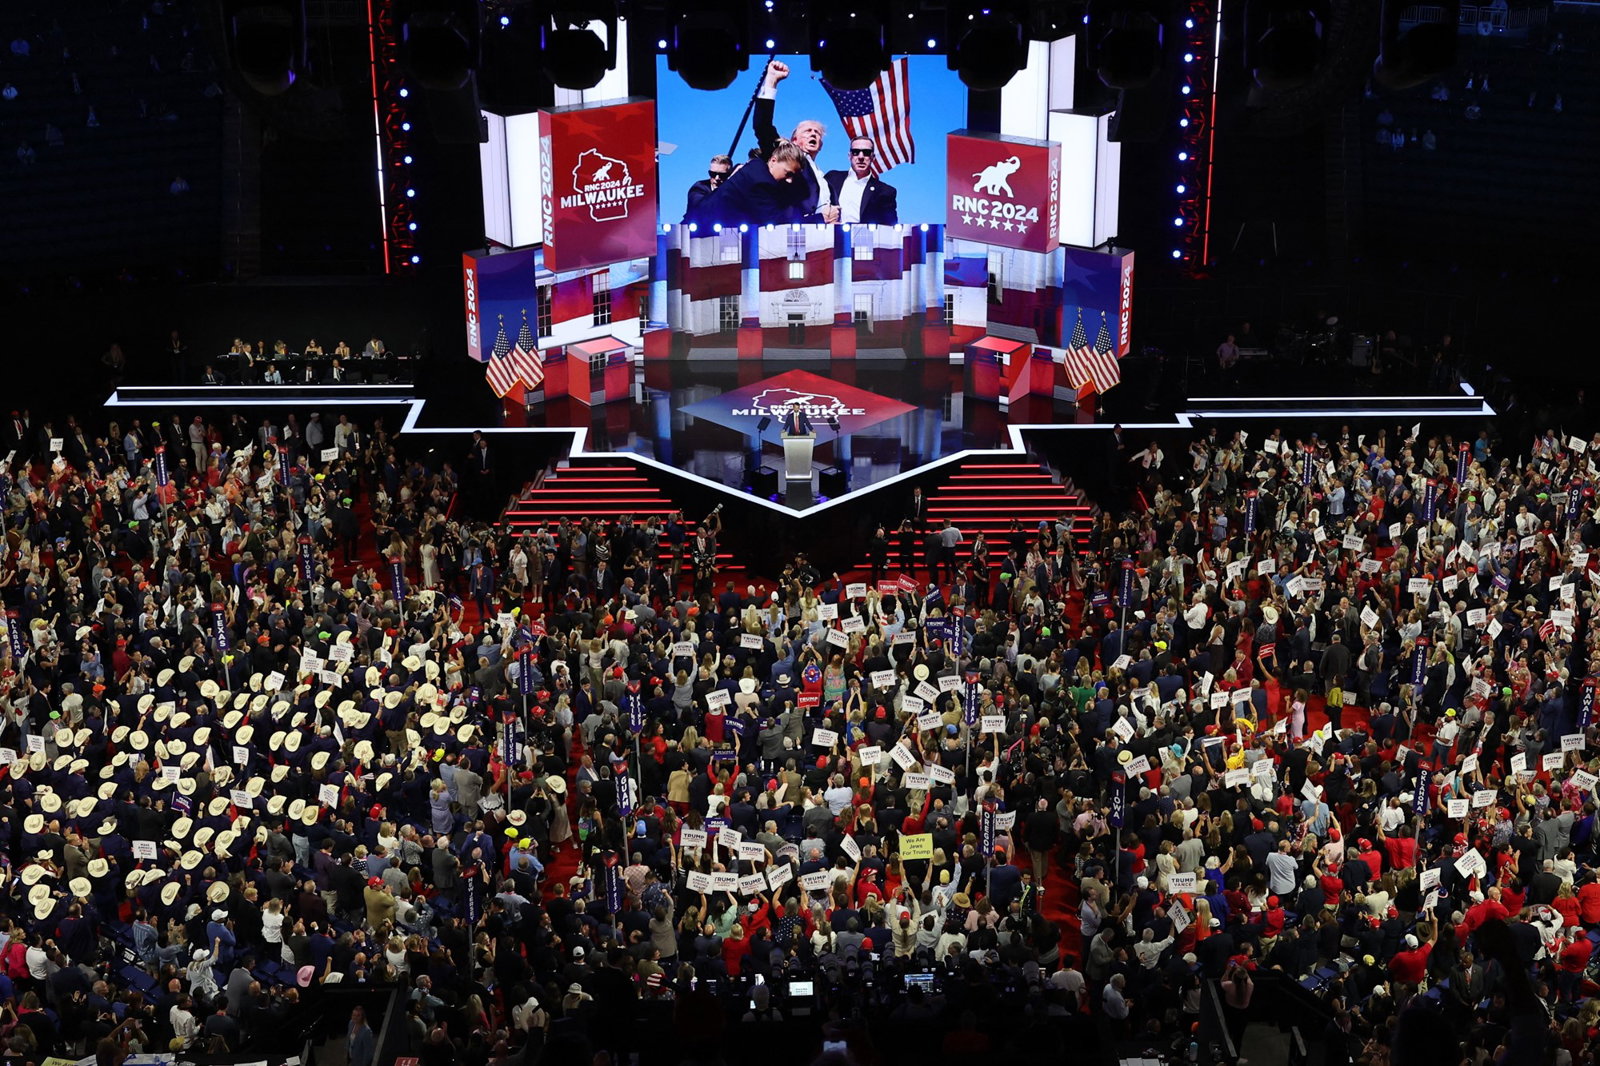 A shot of a large crowd inside a stadium looking to a stage with a photo of Donald Trump raising a fist